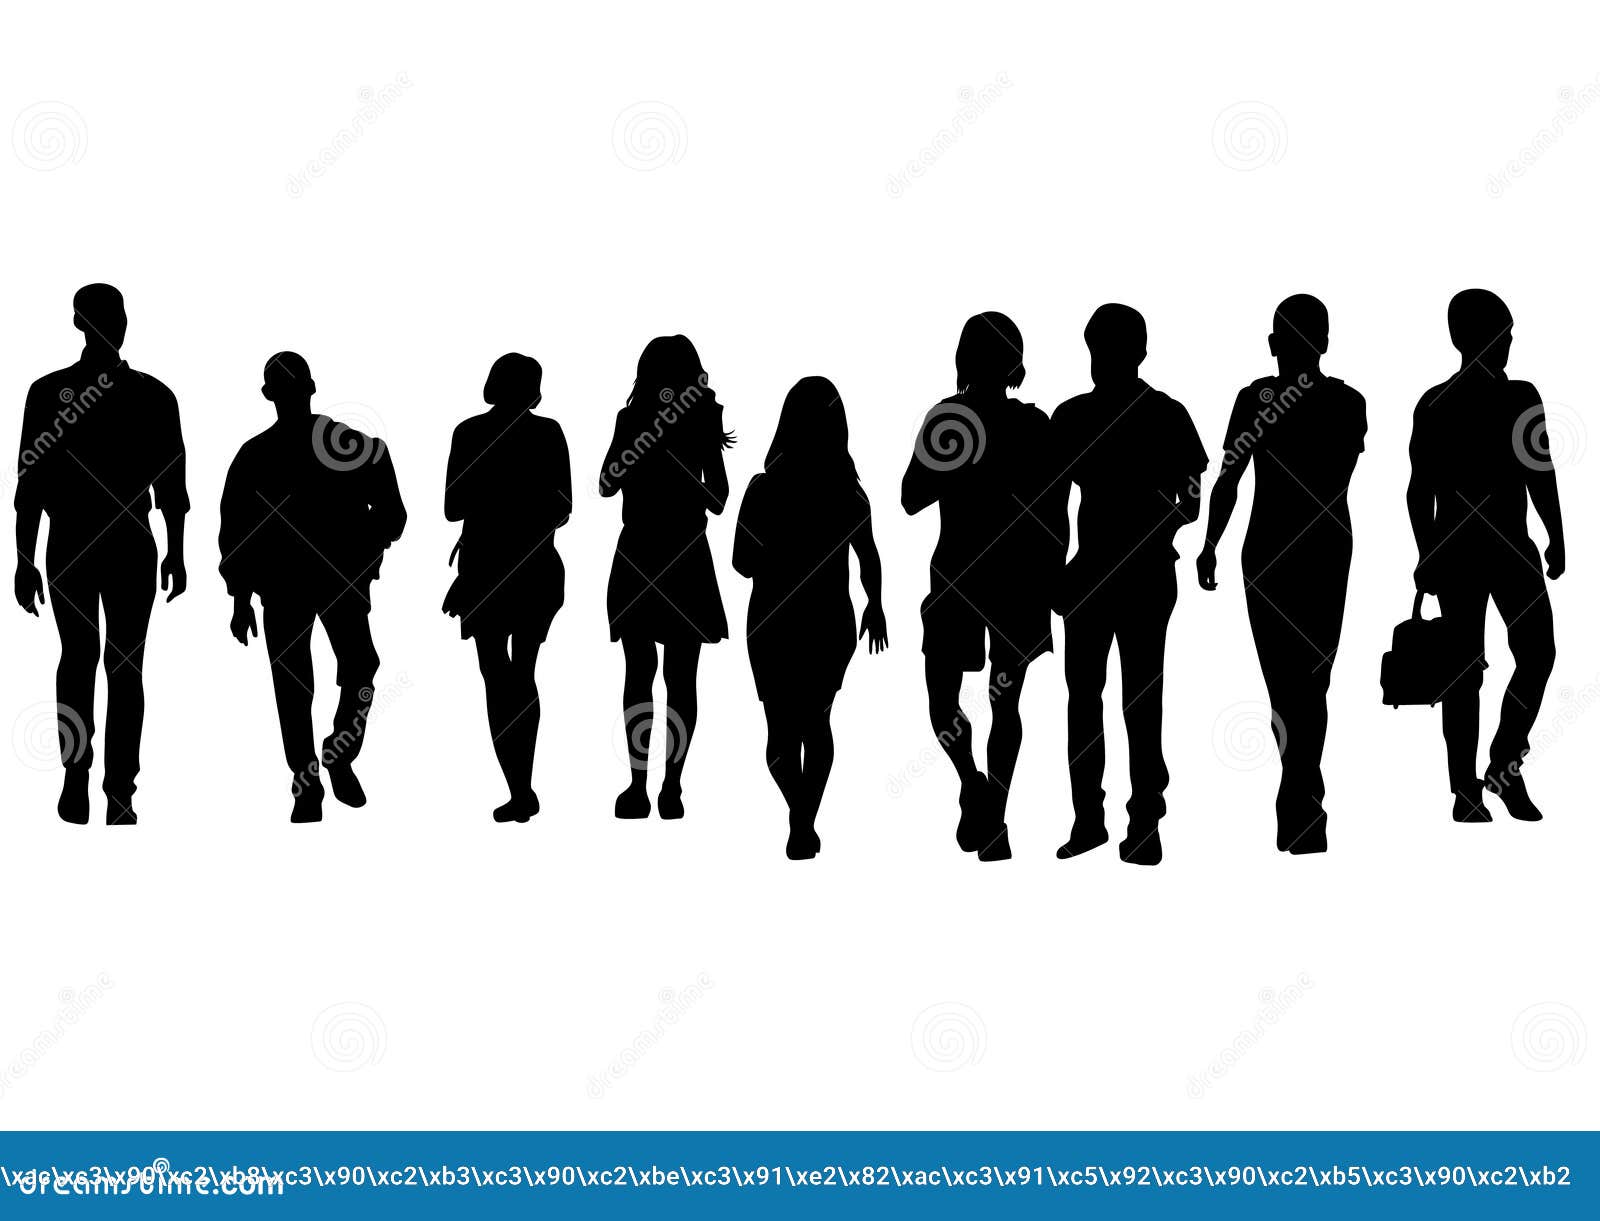 Group of people one stock vector. Illustration of casual - 98161628